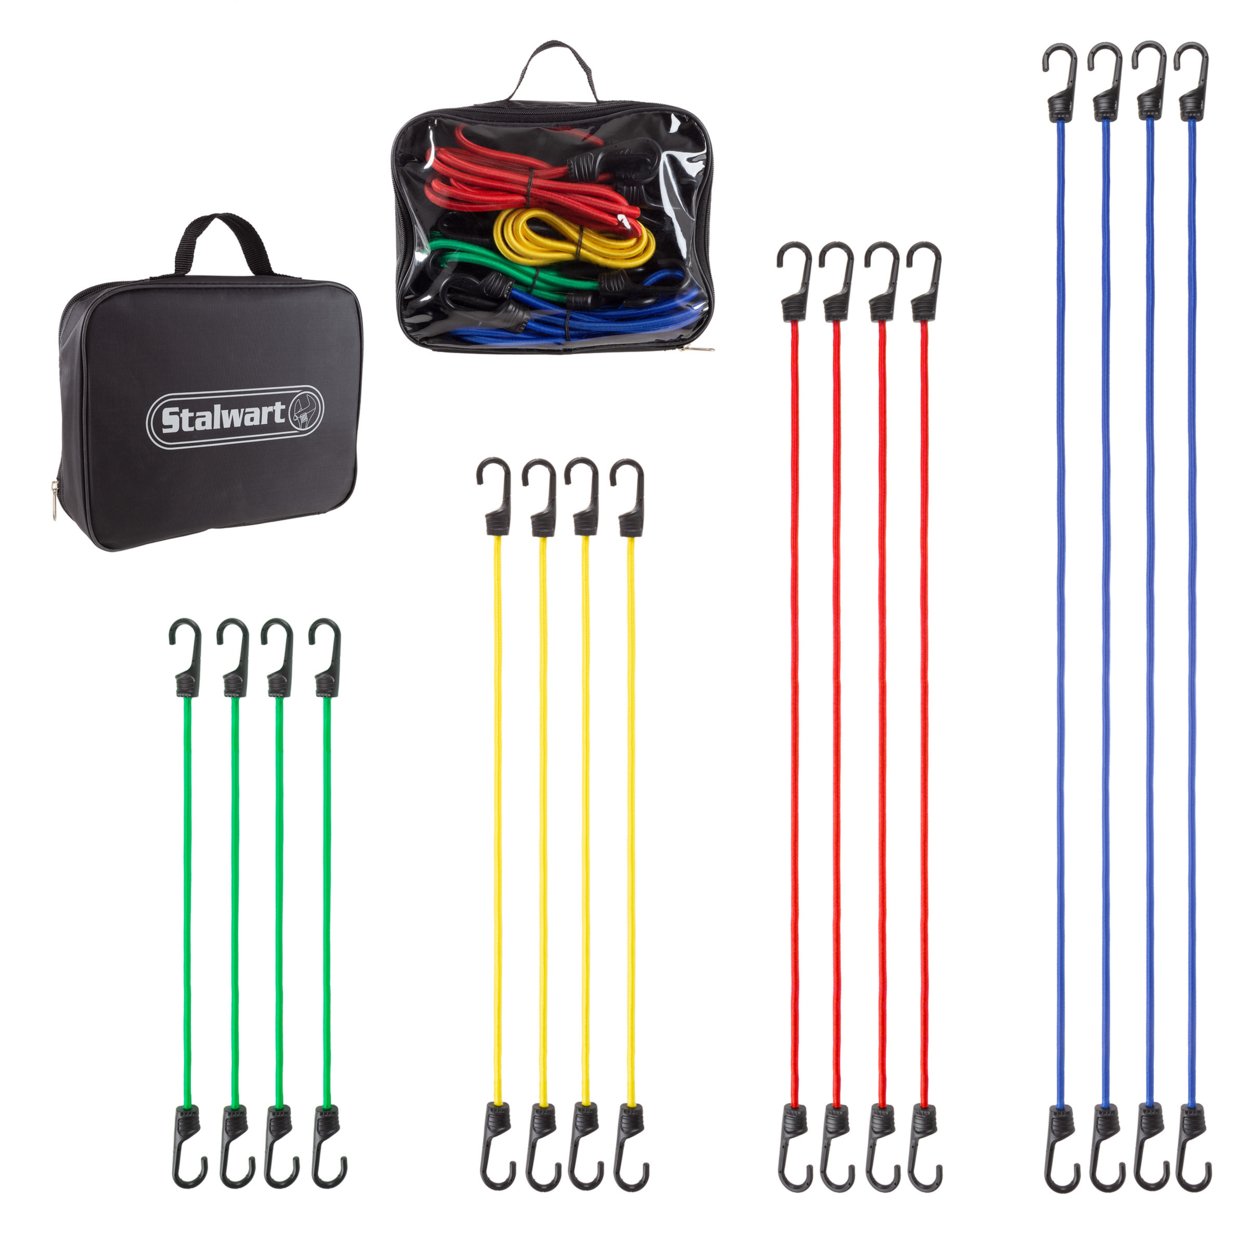 16 Piece Bungee Cord Set- Assortment Of 4 Sizes With Storage Bag-Tie Downs With Hooks For Trucks, Trailers